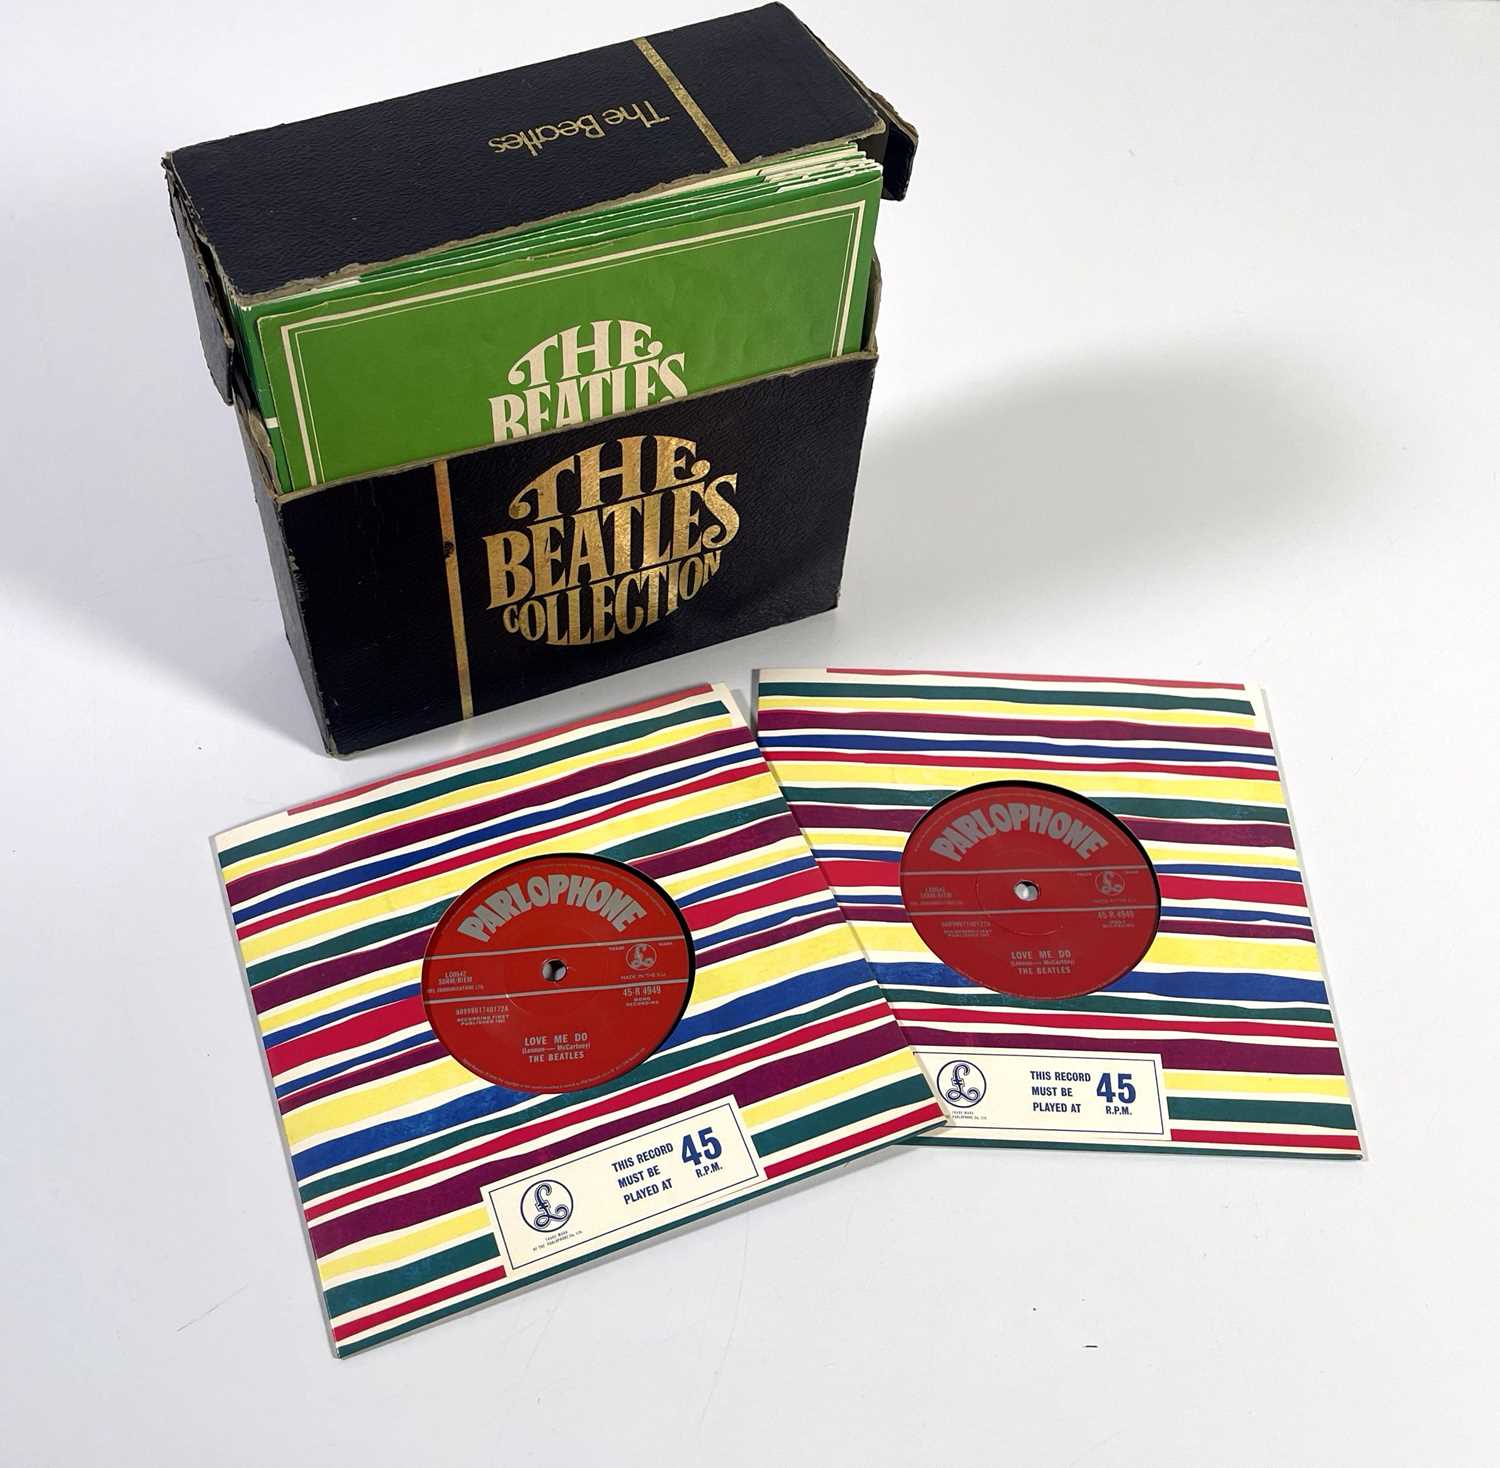 THE BEATLES - BEATLES COLLECTION 1970 SINGLES BOX.